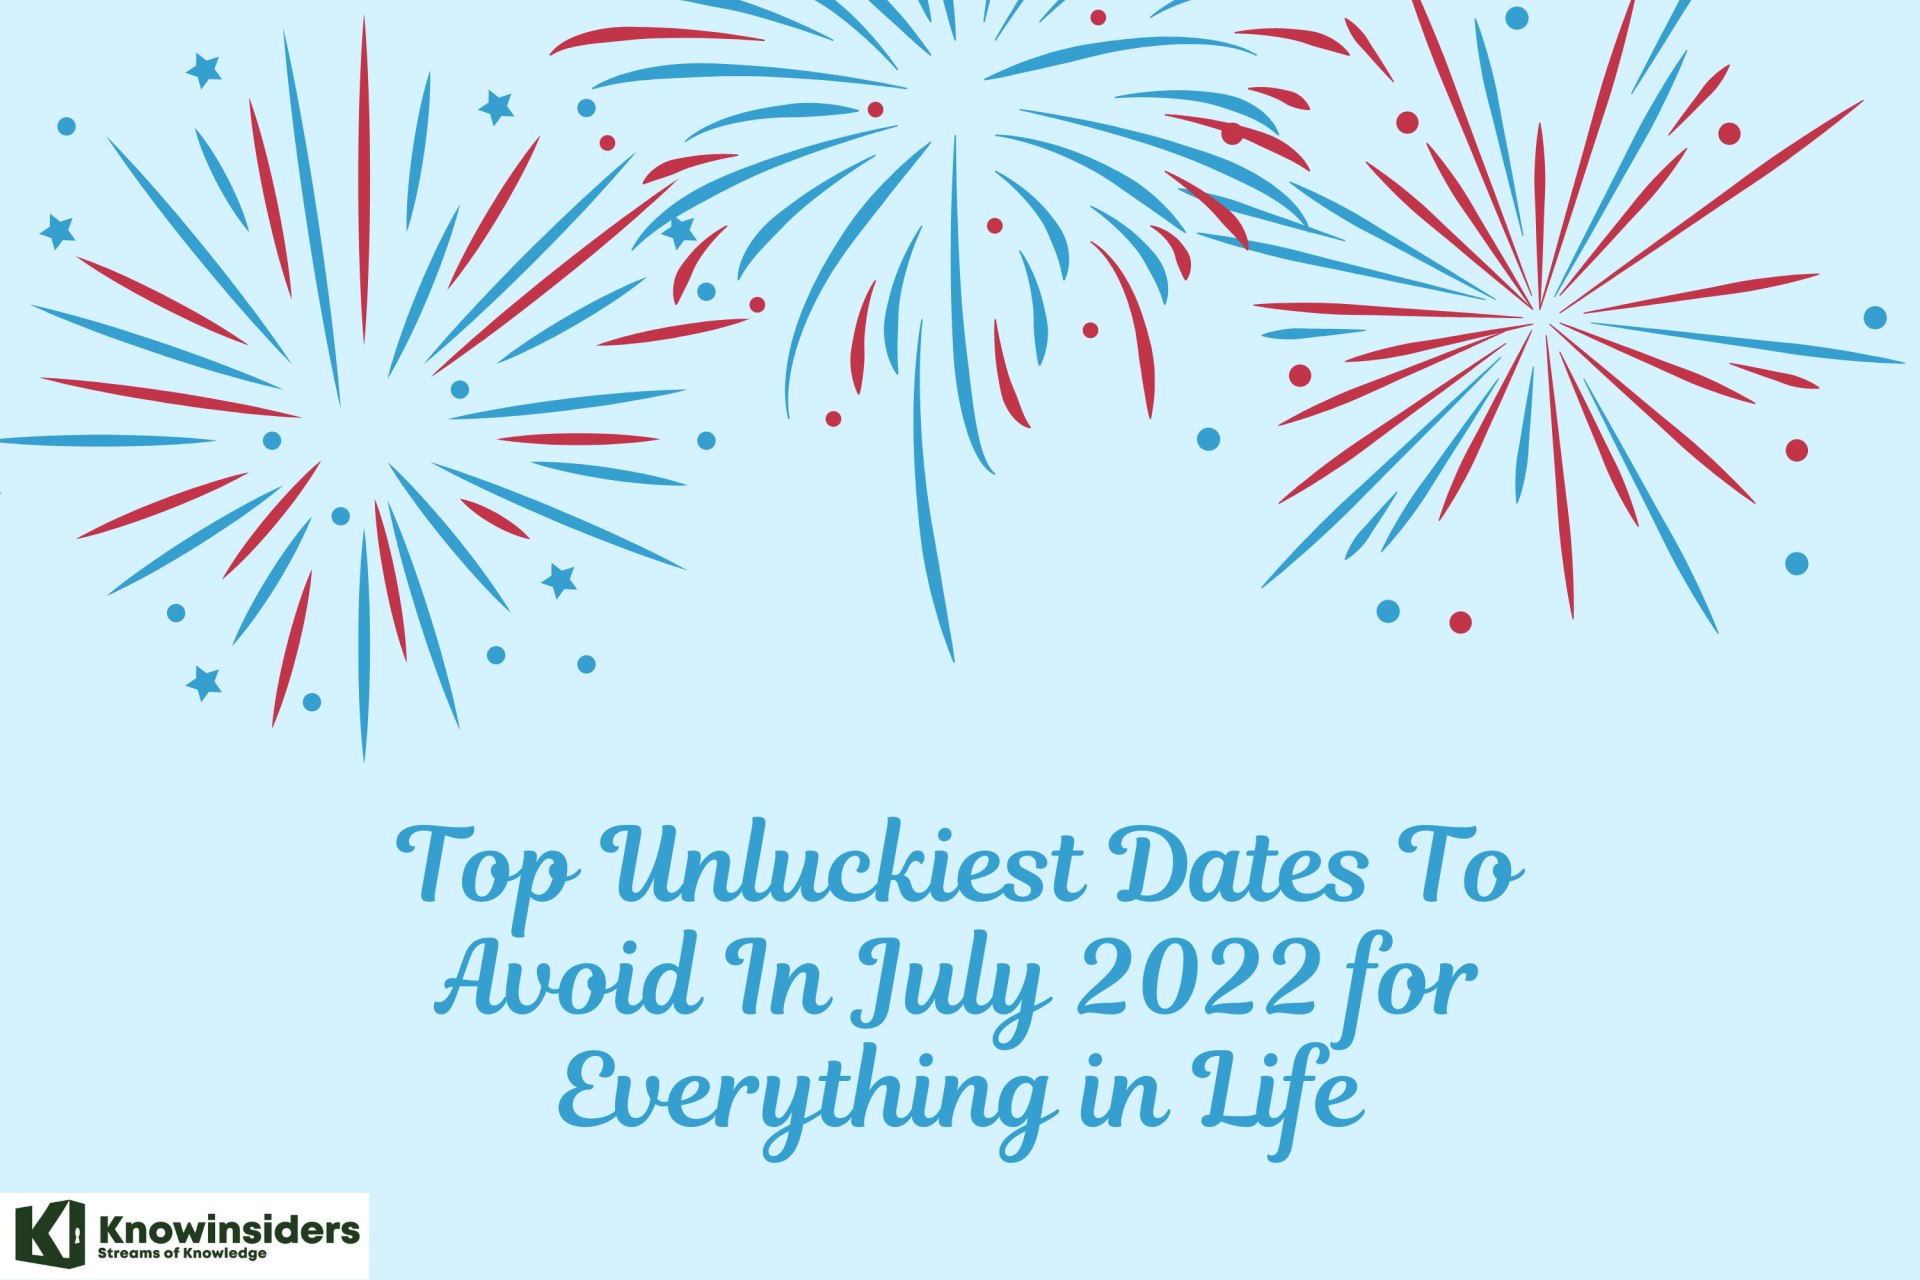 Top Unluckiest Dates To Avoid In July 2022 for Everything in Life